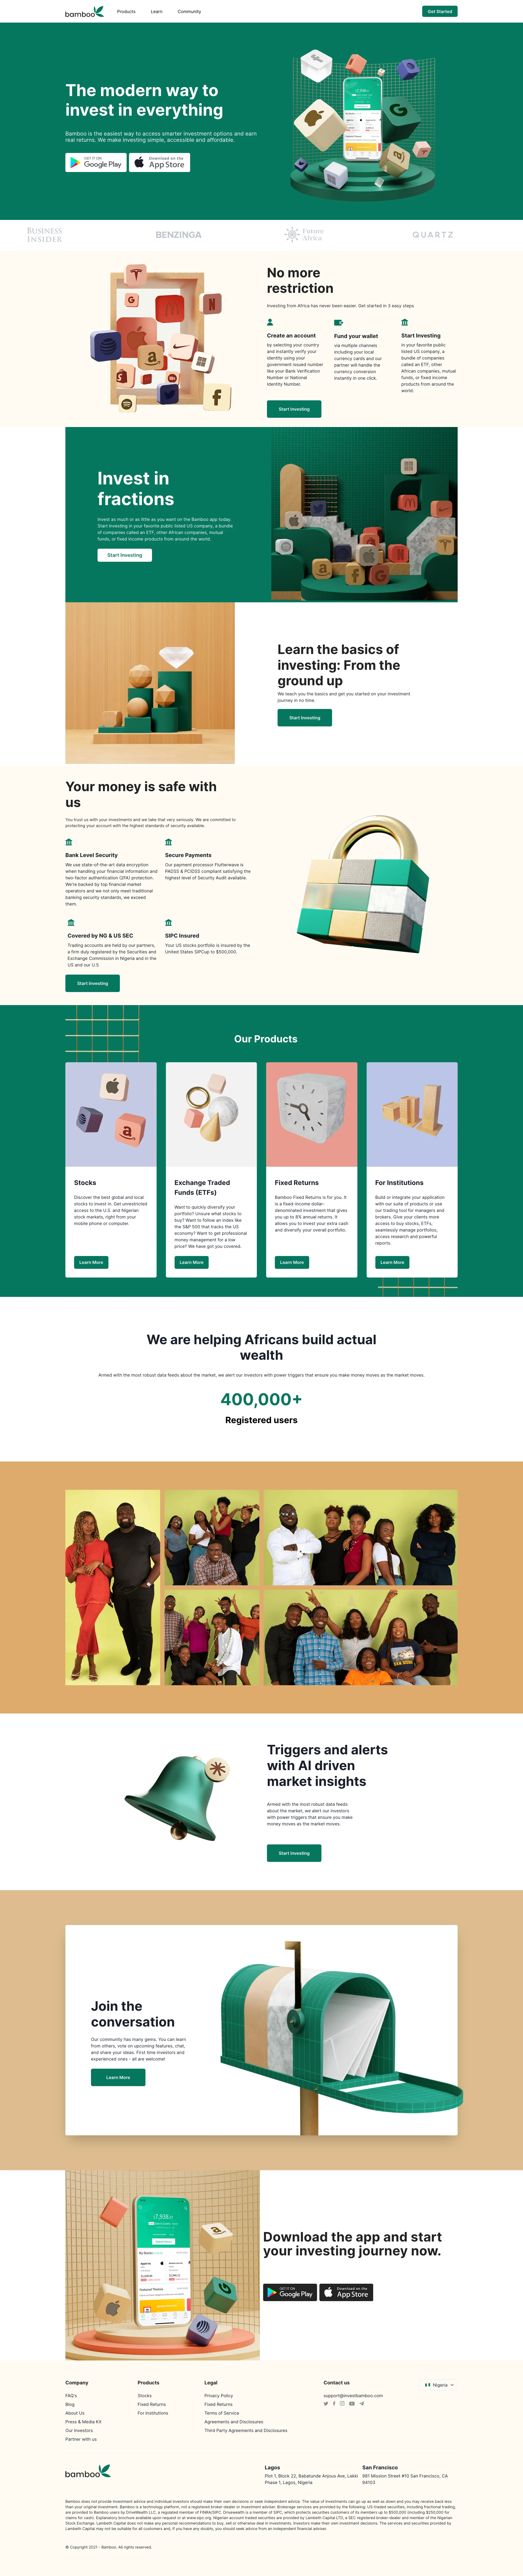 Invest Bamboo Landing Page Example: The modern way to invest in everything. Bamboo is the easiest way to access smarter investment options and earn real returns. We make investing simple, accessible and affordable.